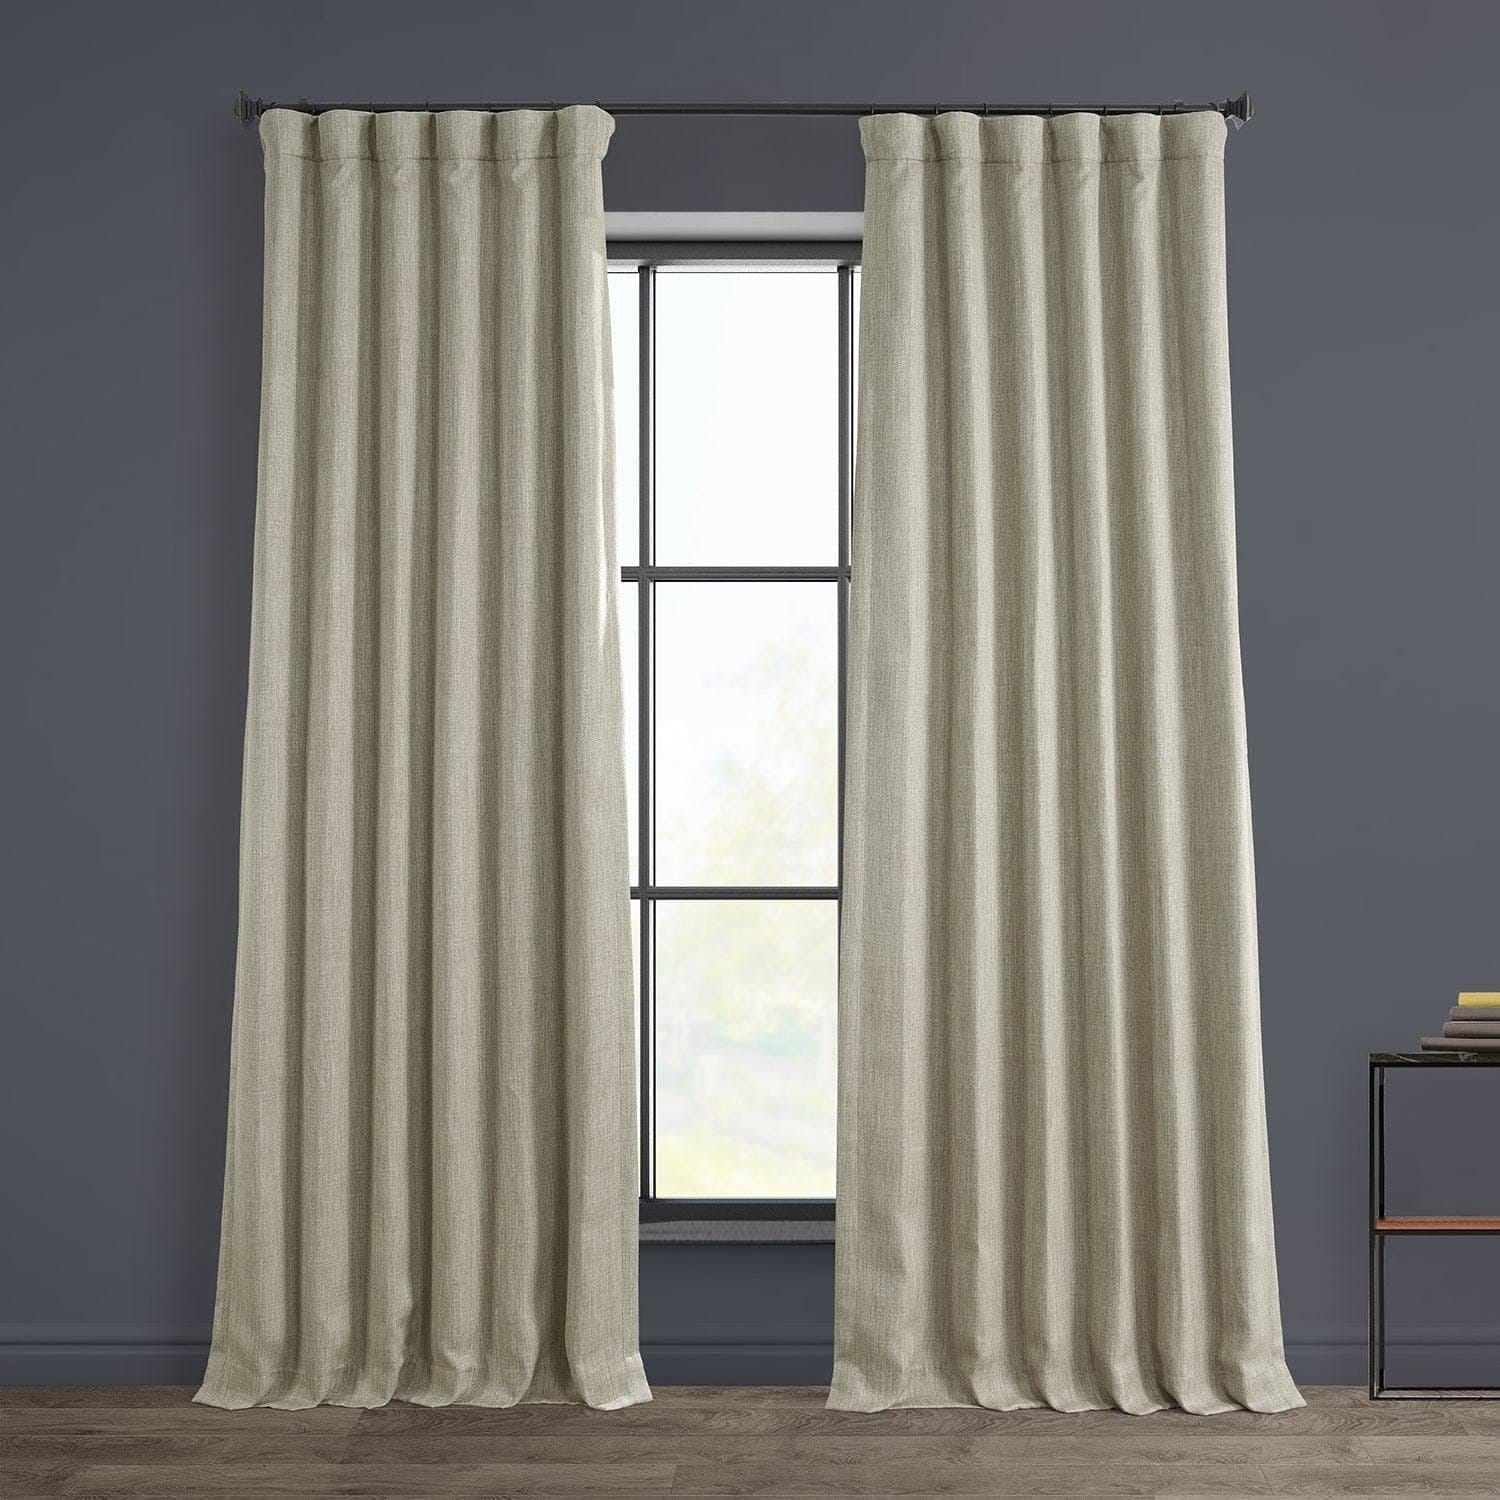 Image of Oatmeal Textured Faux Linen Room Darkening Curtain